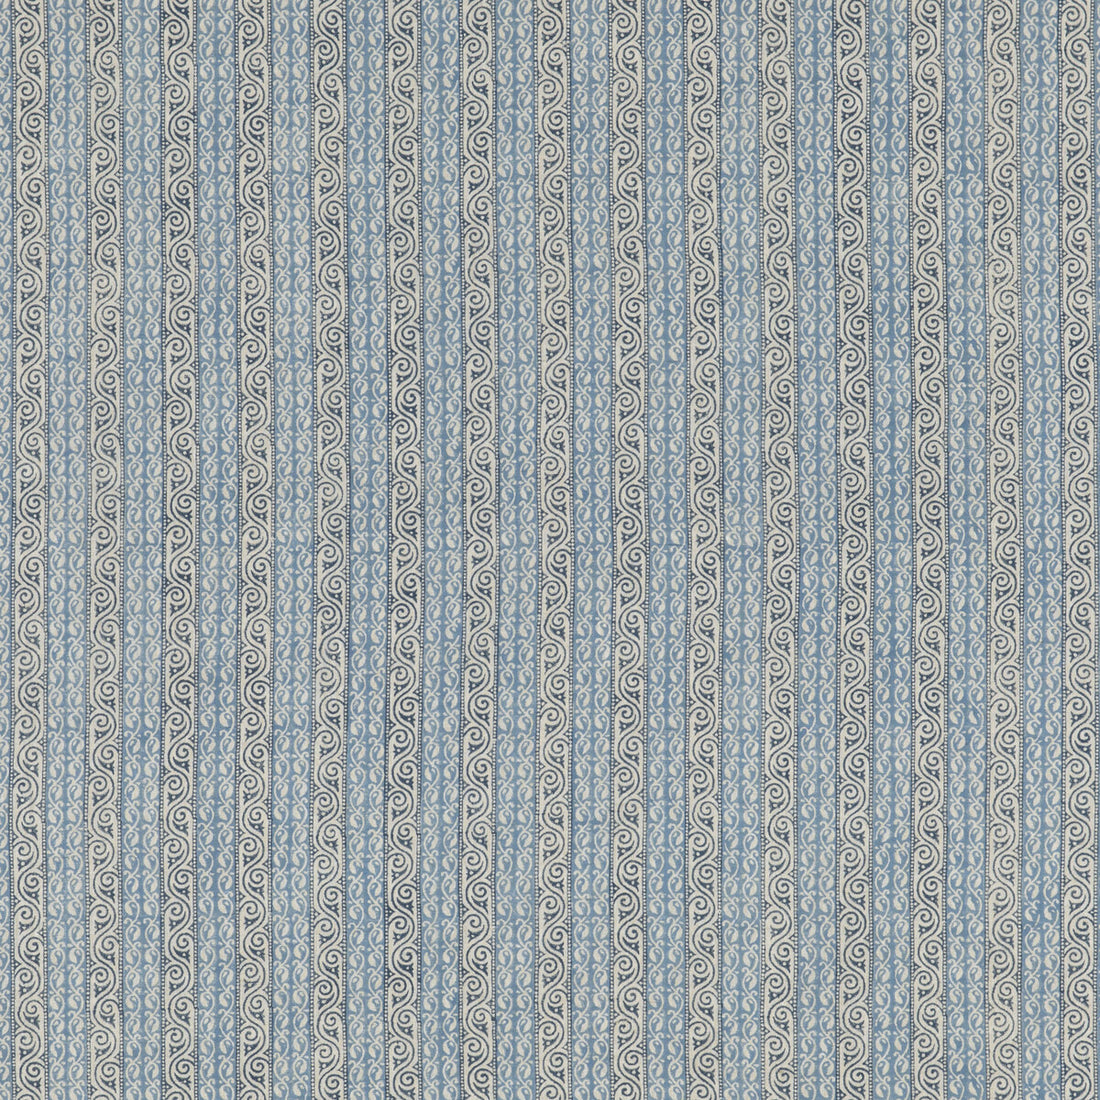 Tetbury Stripe fabric in blue color - pattern BP10921.1.0 - by G P &amp; J Baker in the Portobello collection